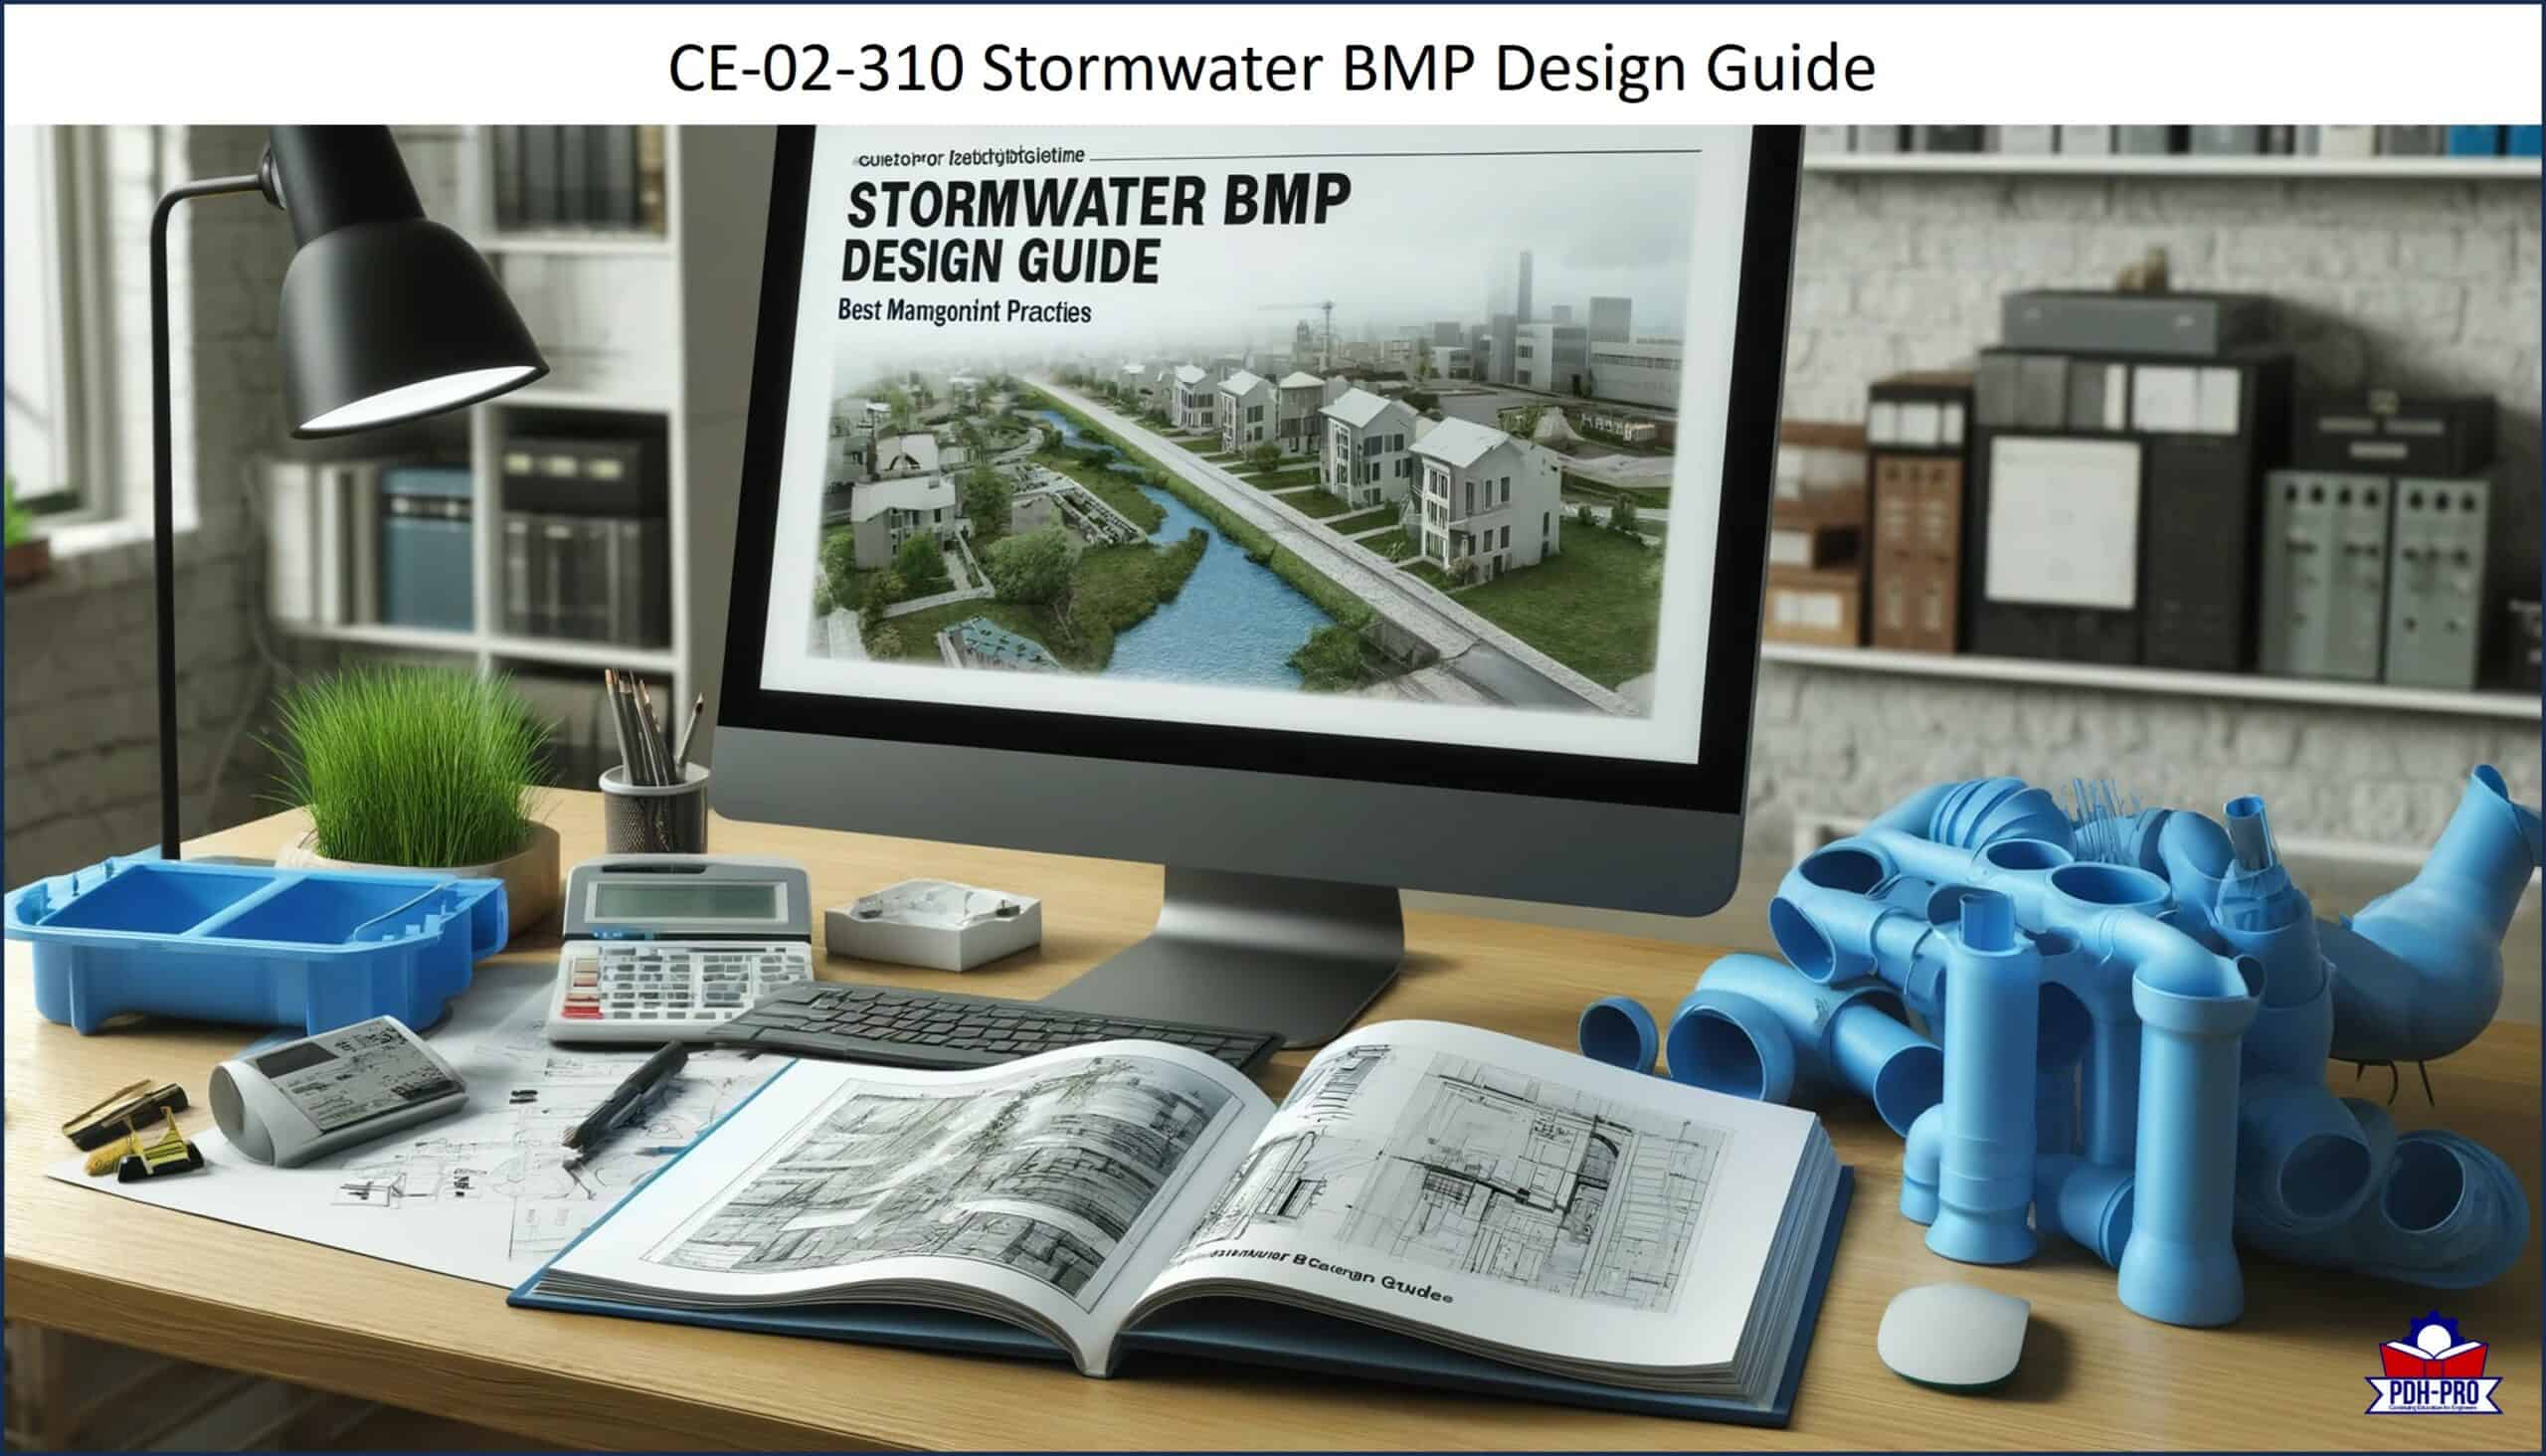 Stormwater BMP Design Guide